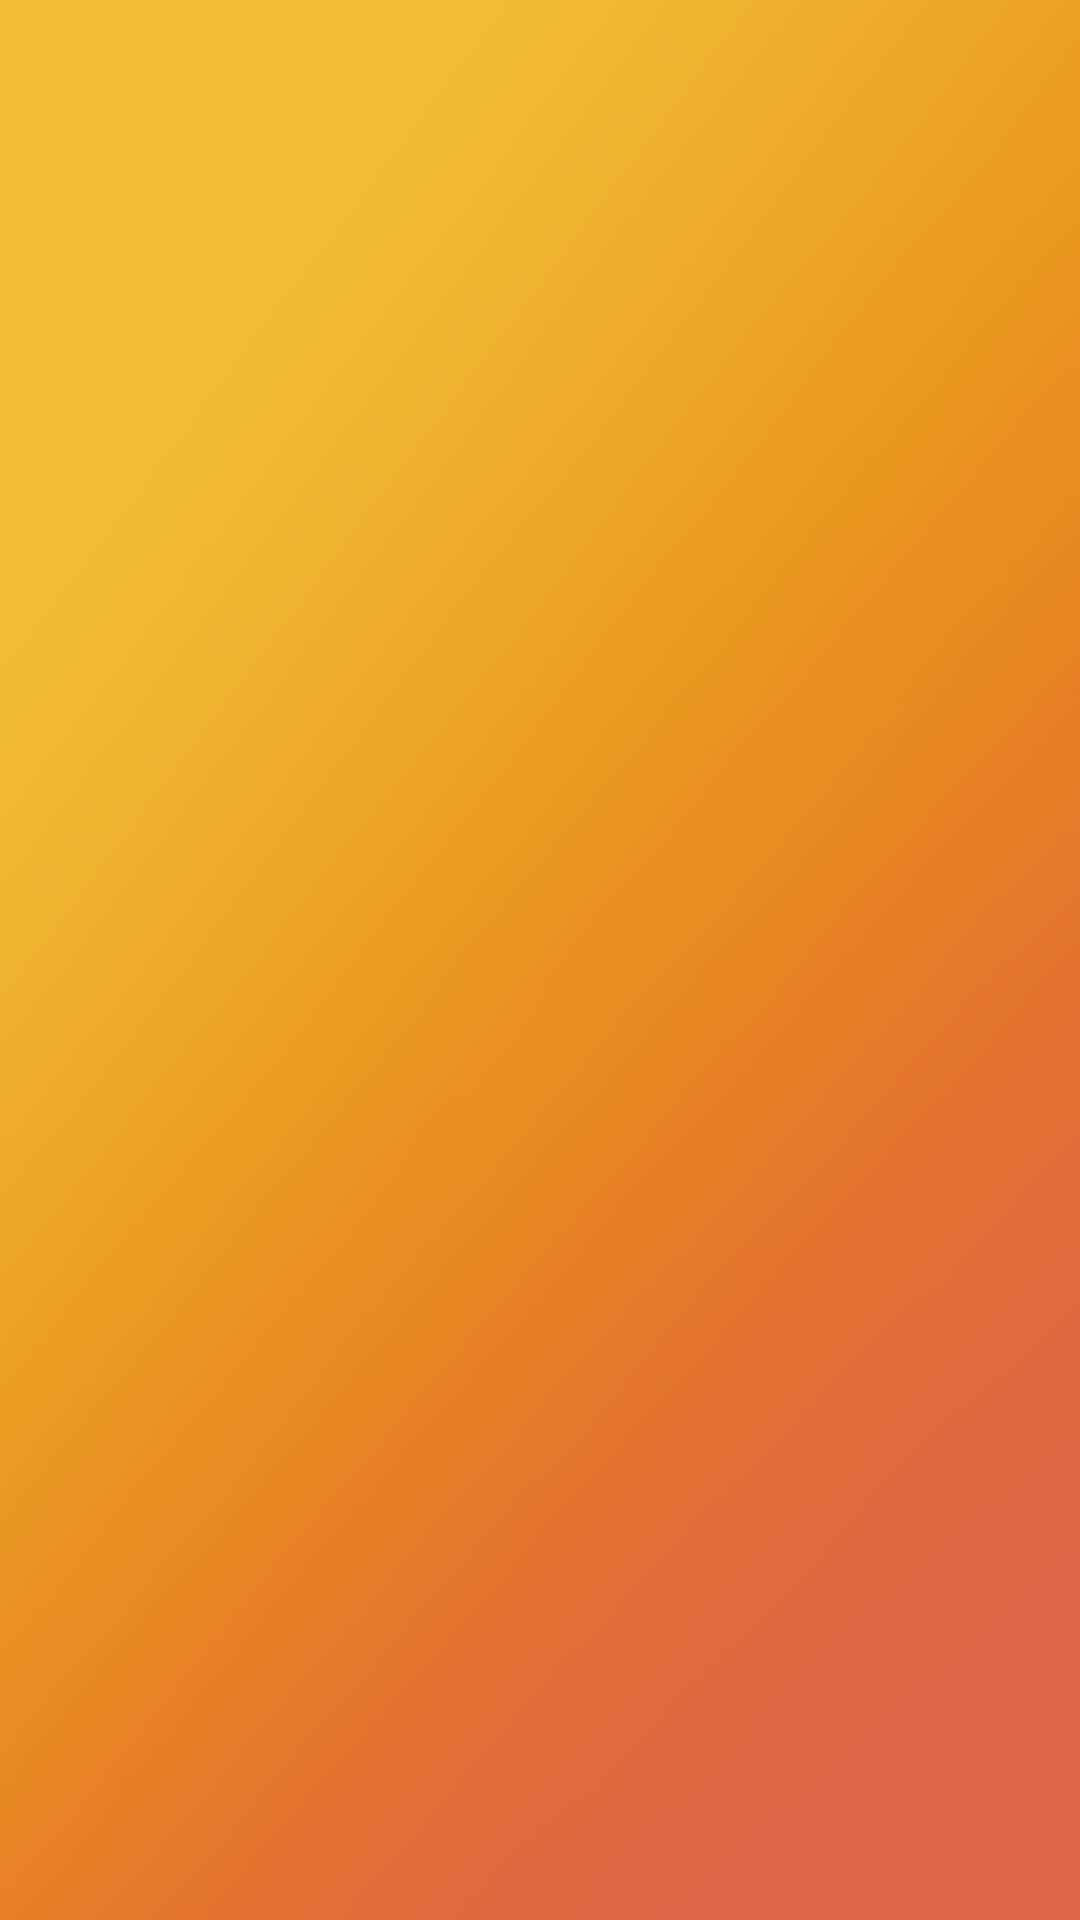 Brighten Your Day with Vivid Yellow Gradient Background